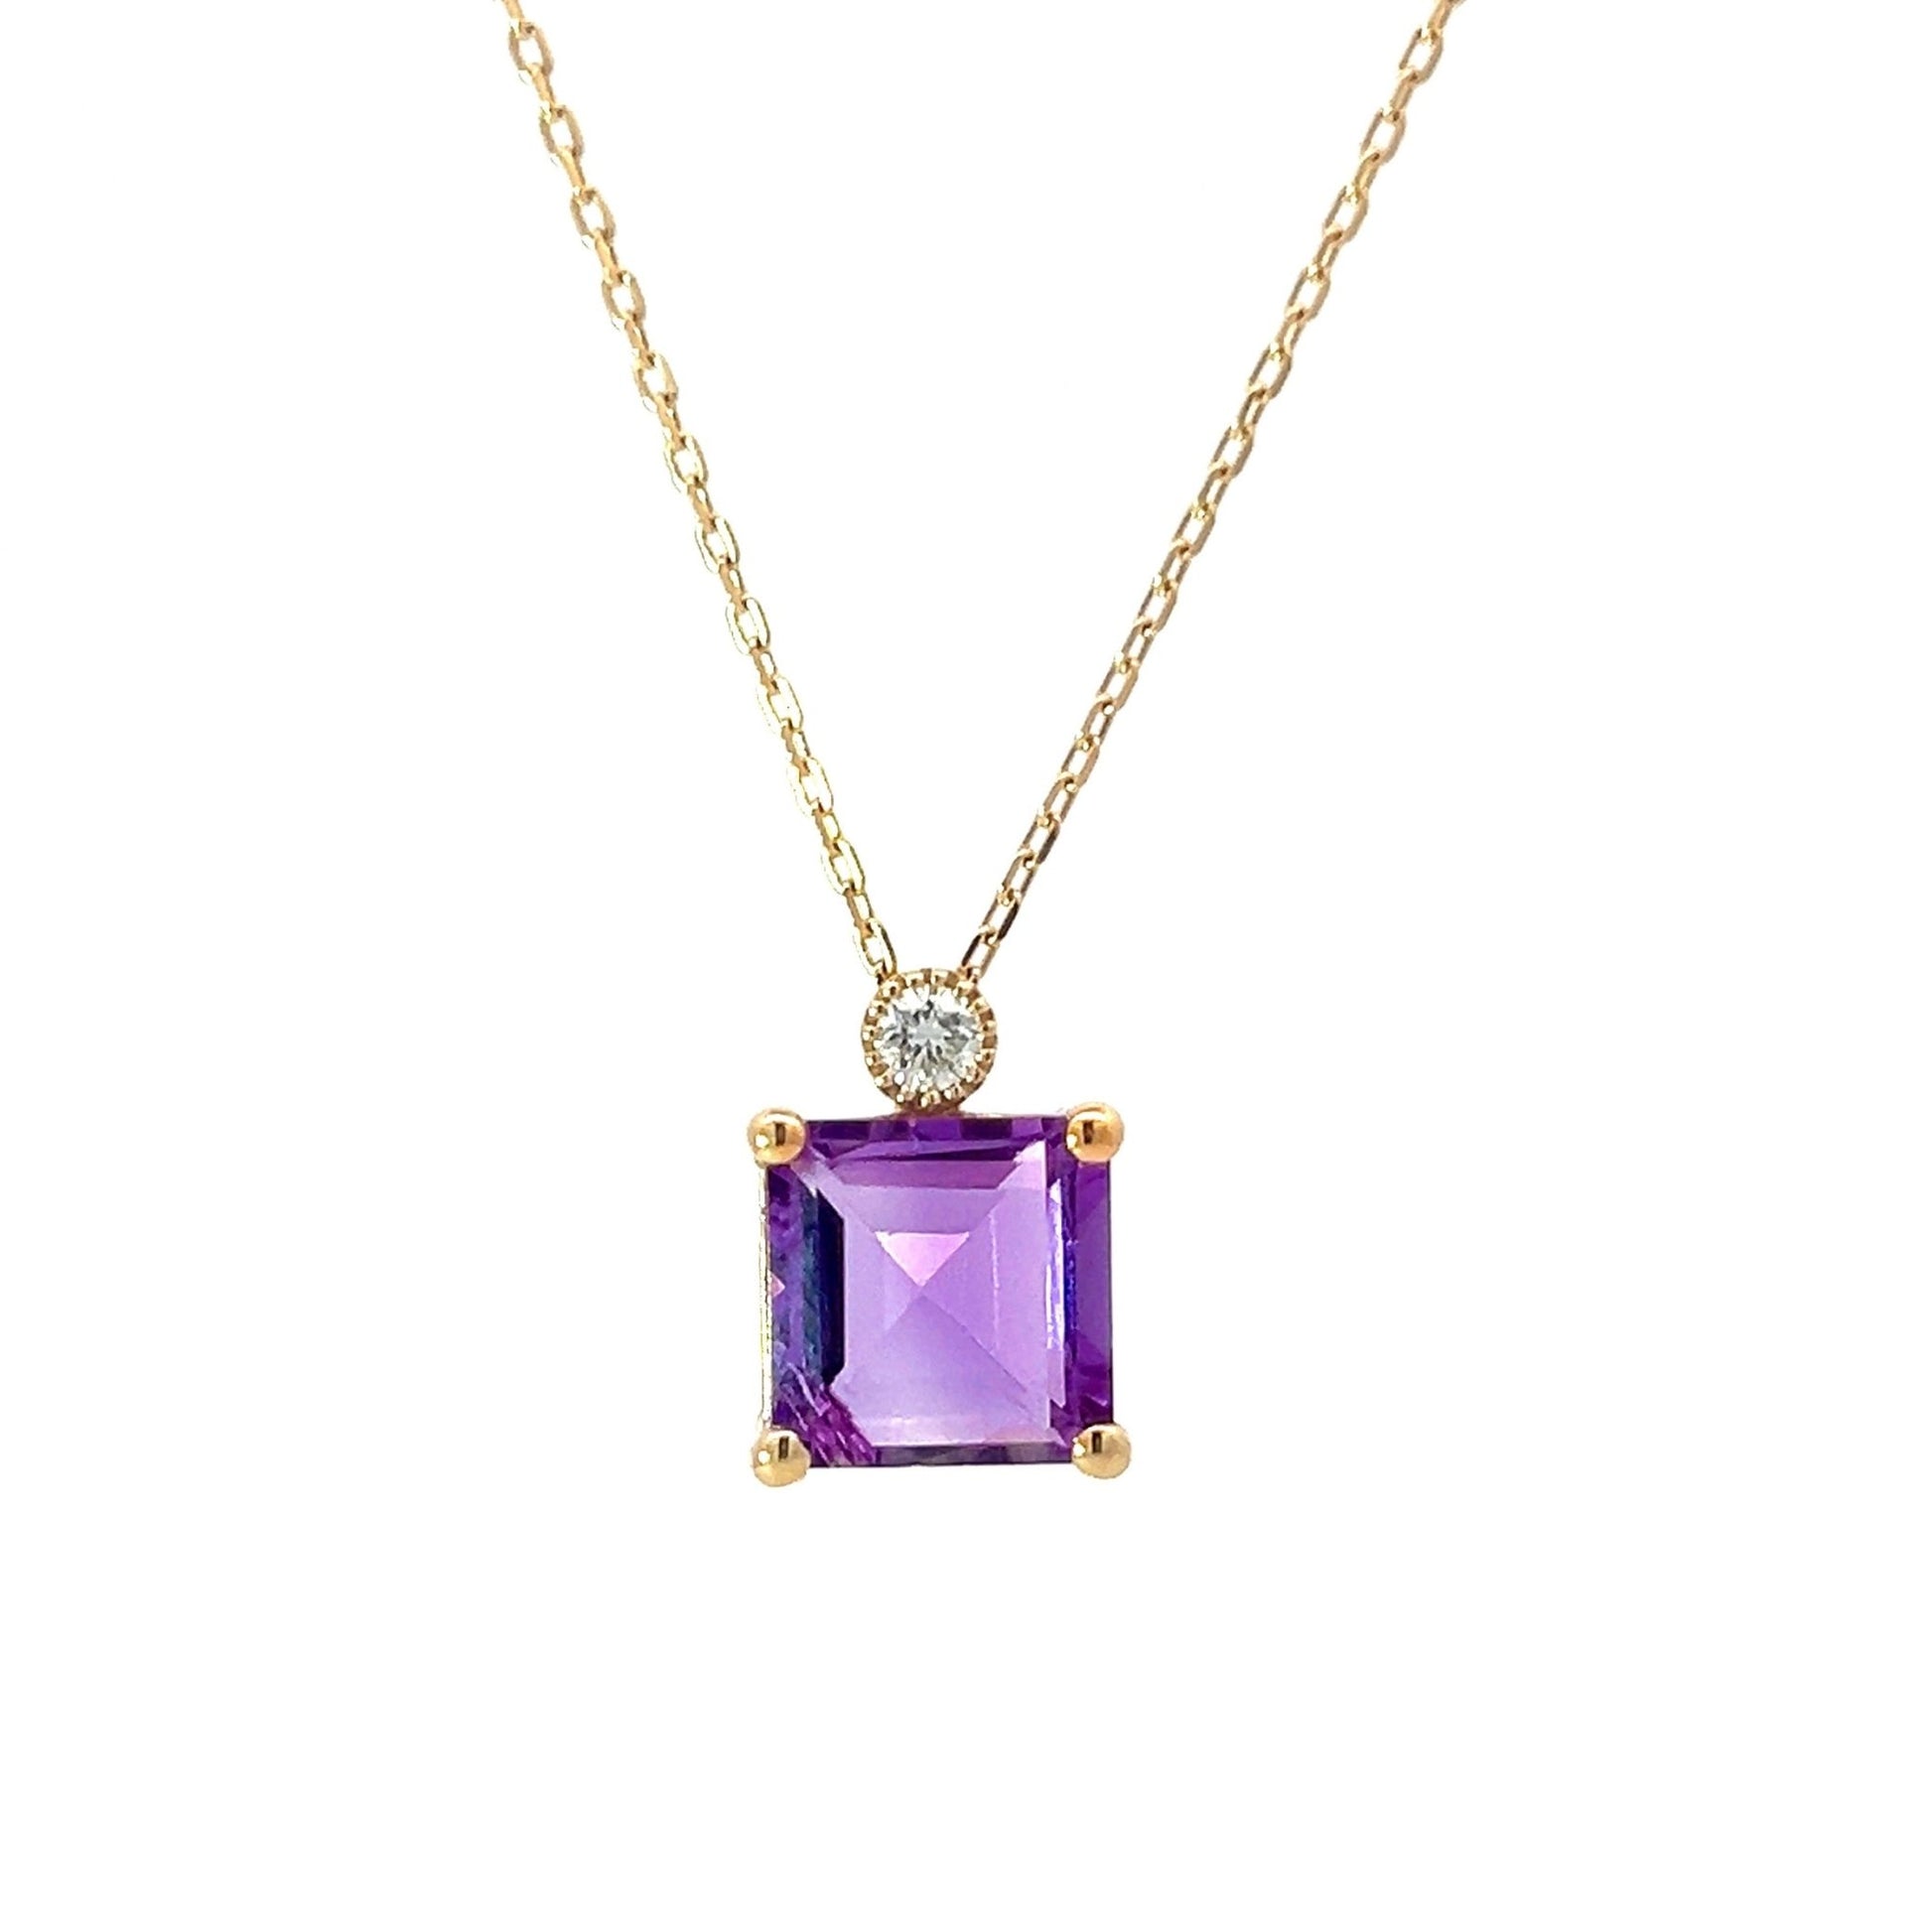 Princesa Necklace in Diamond and Amethyst - 18k Gold - Lynor